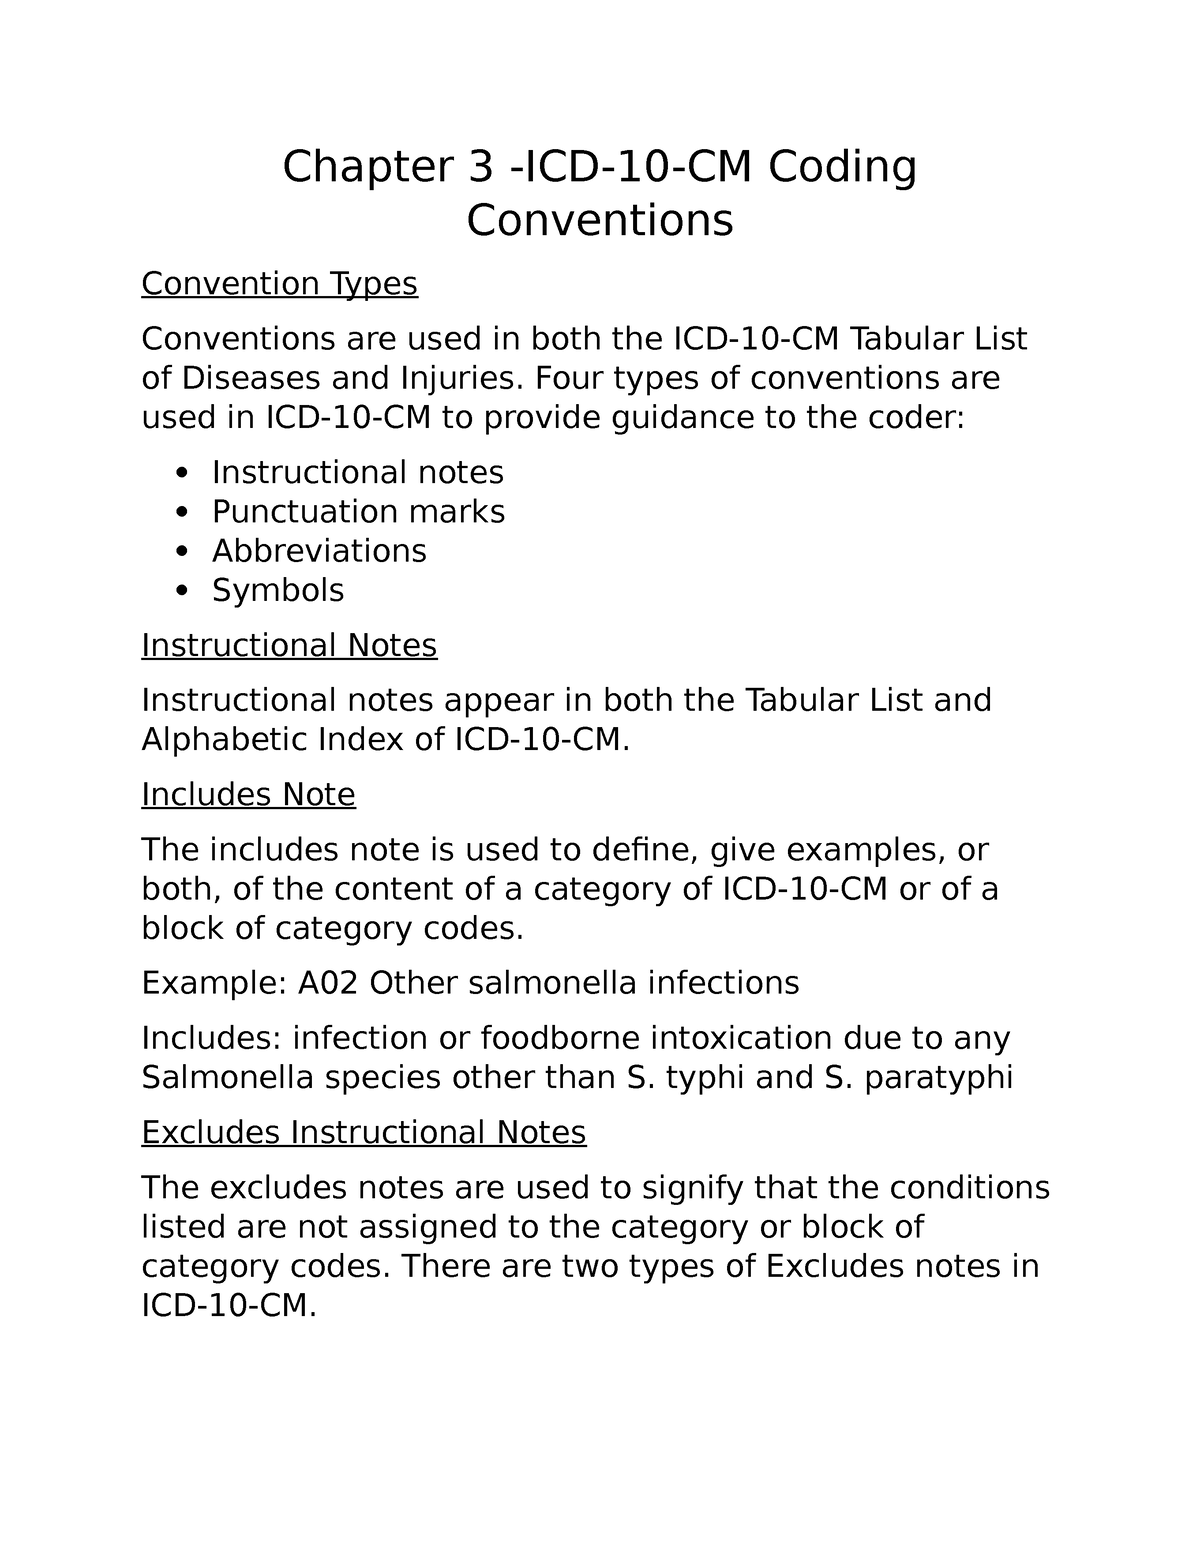 Chapter 3 Icd 10 Cm Coding Conventions Chapter 3 Icd 10 Cm Coding Conventions Convention 8179